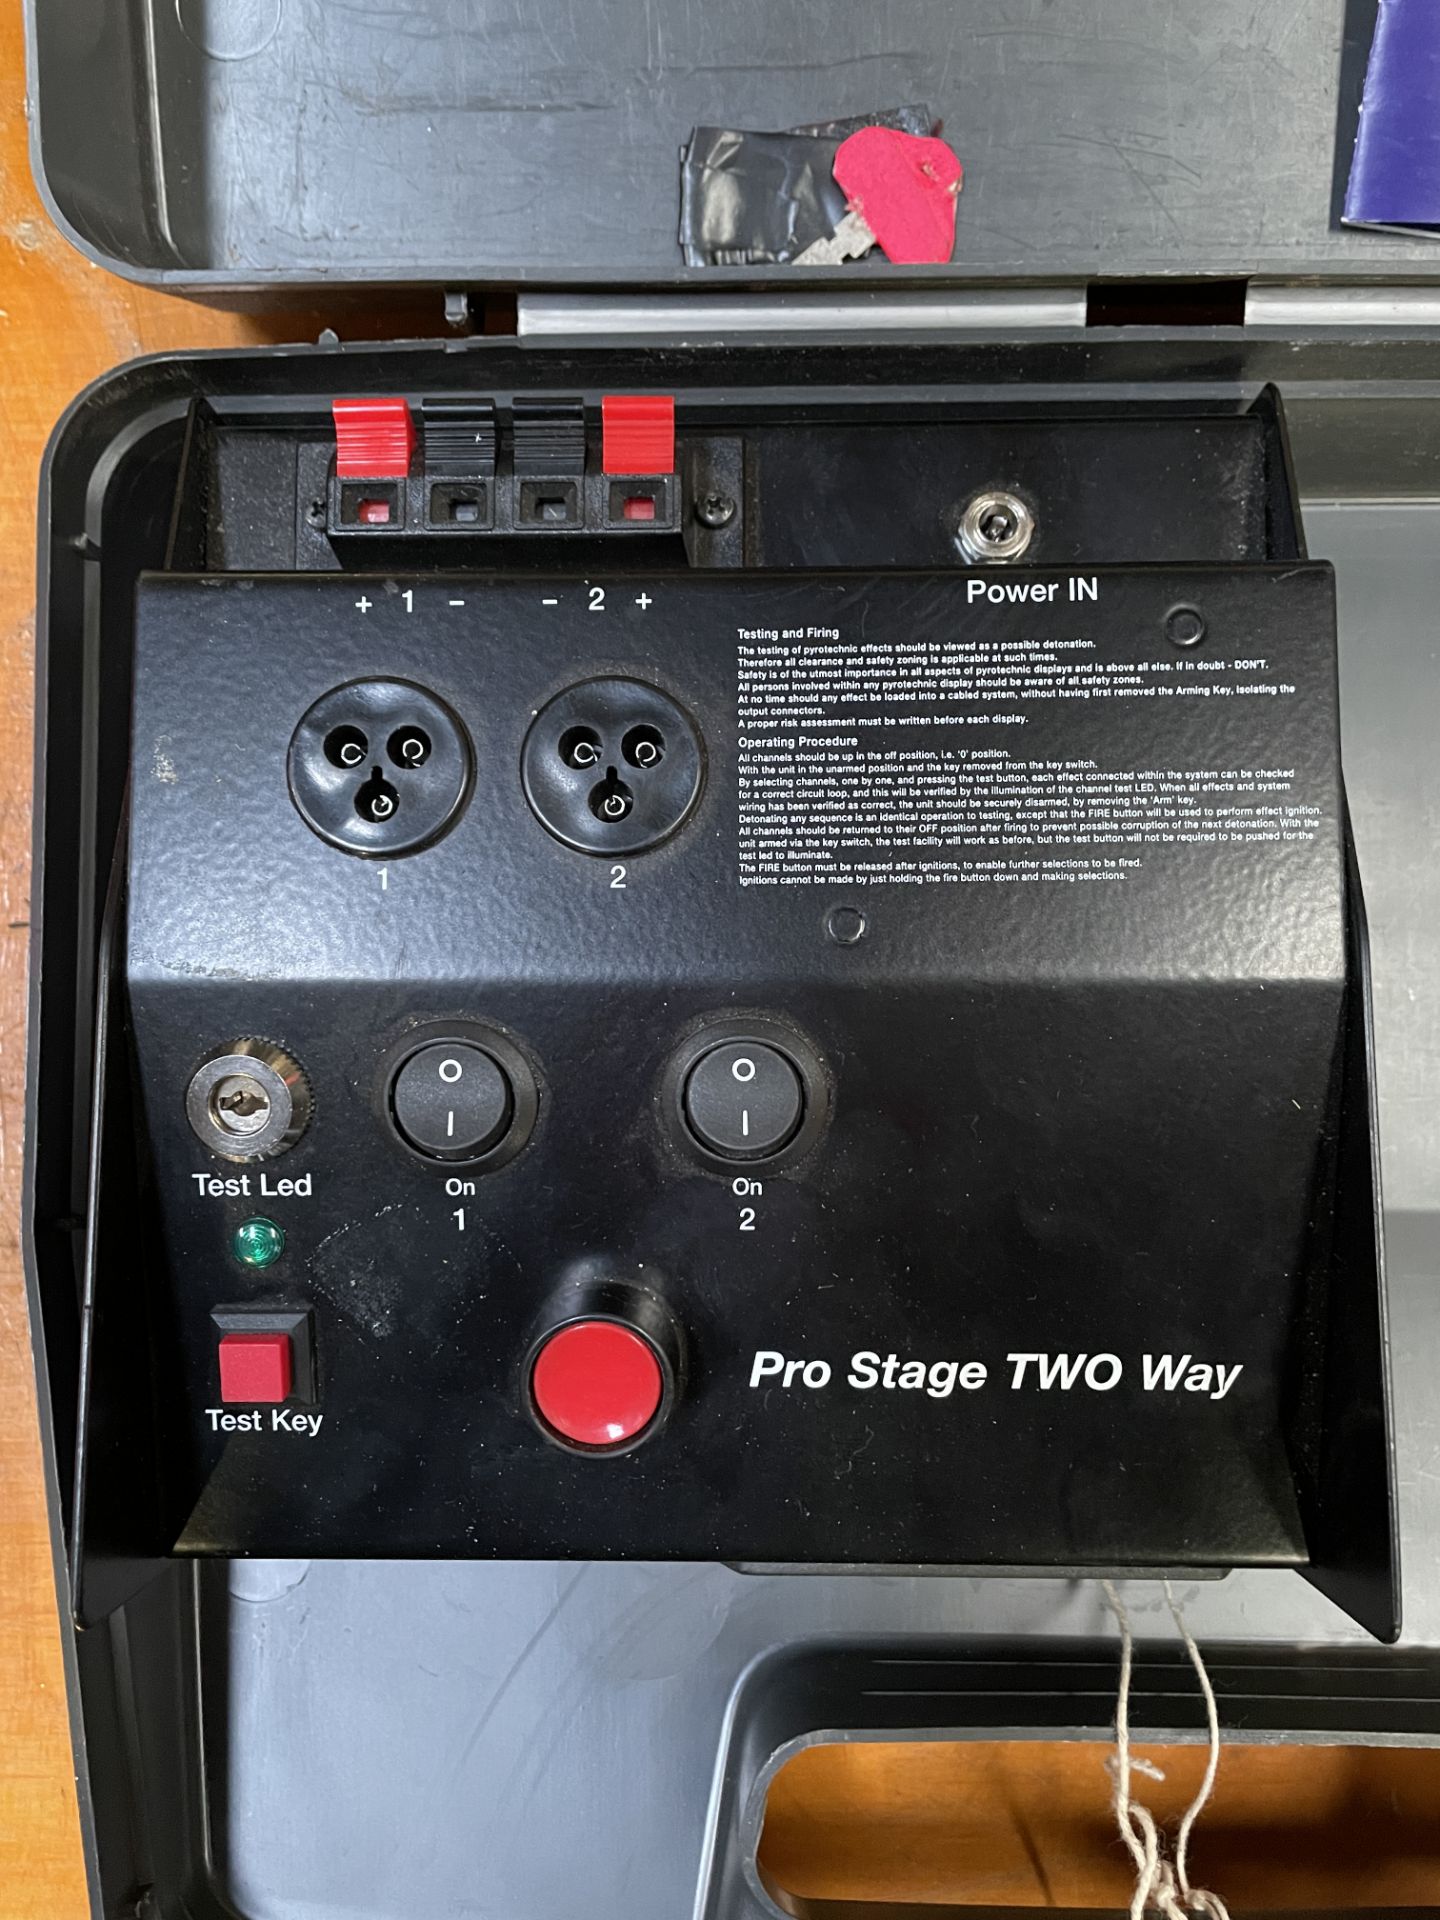 Le Maitre Pro Stage Two-Way Controller (Location: Brentwood. Please Refer to General Notes)